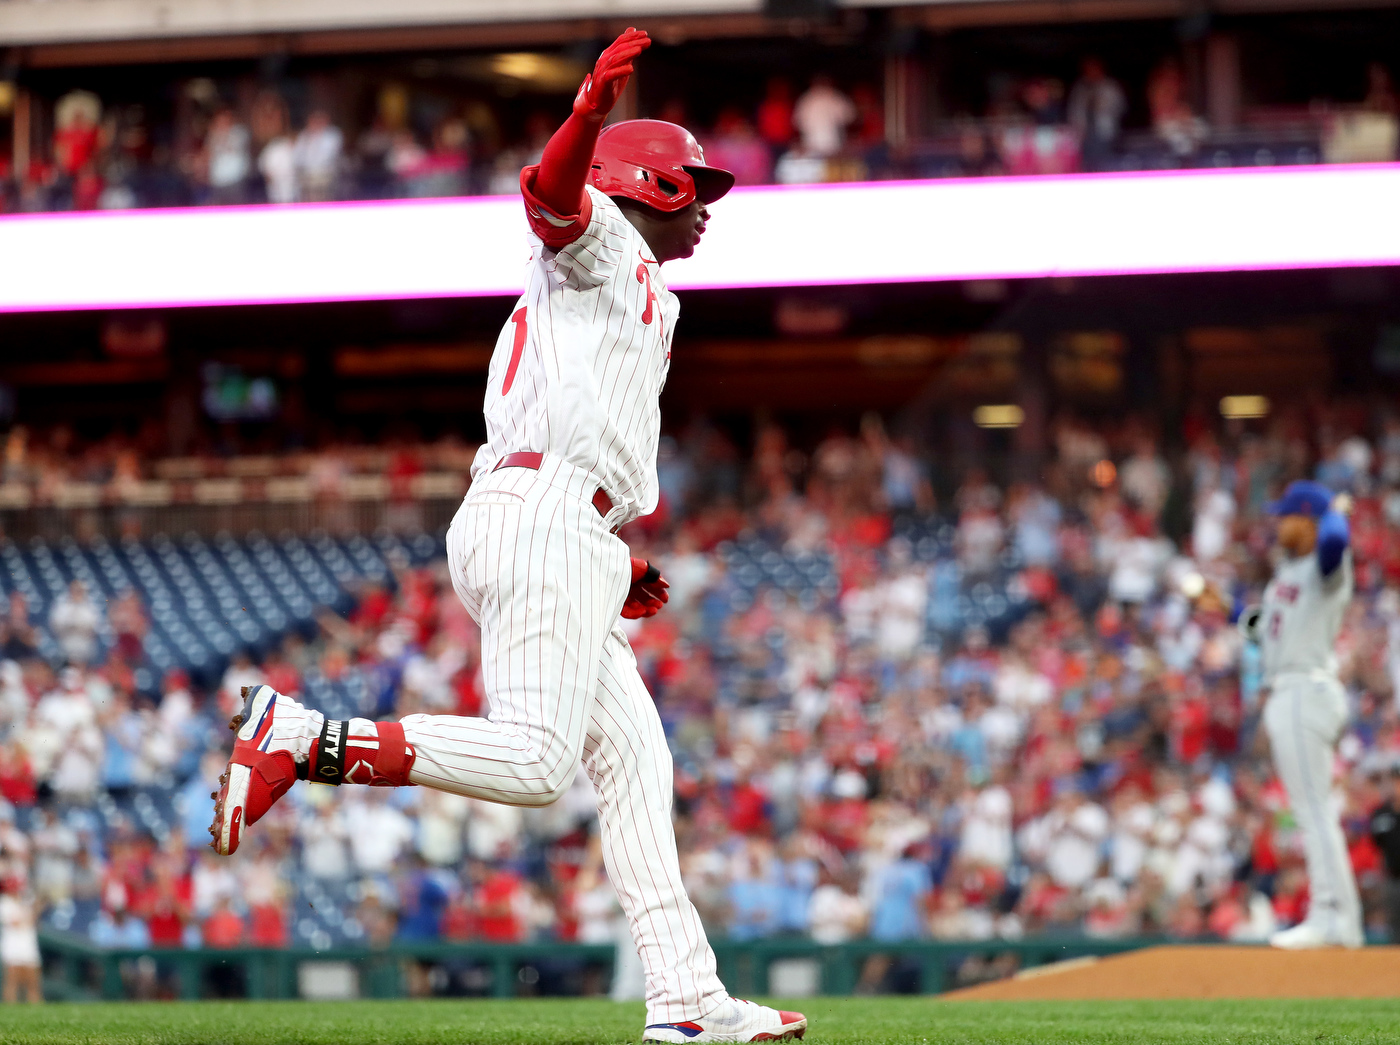 Phillies dealing with another injury as Didi Gregorius misses 2nd